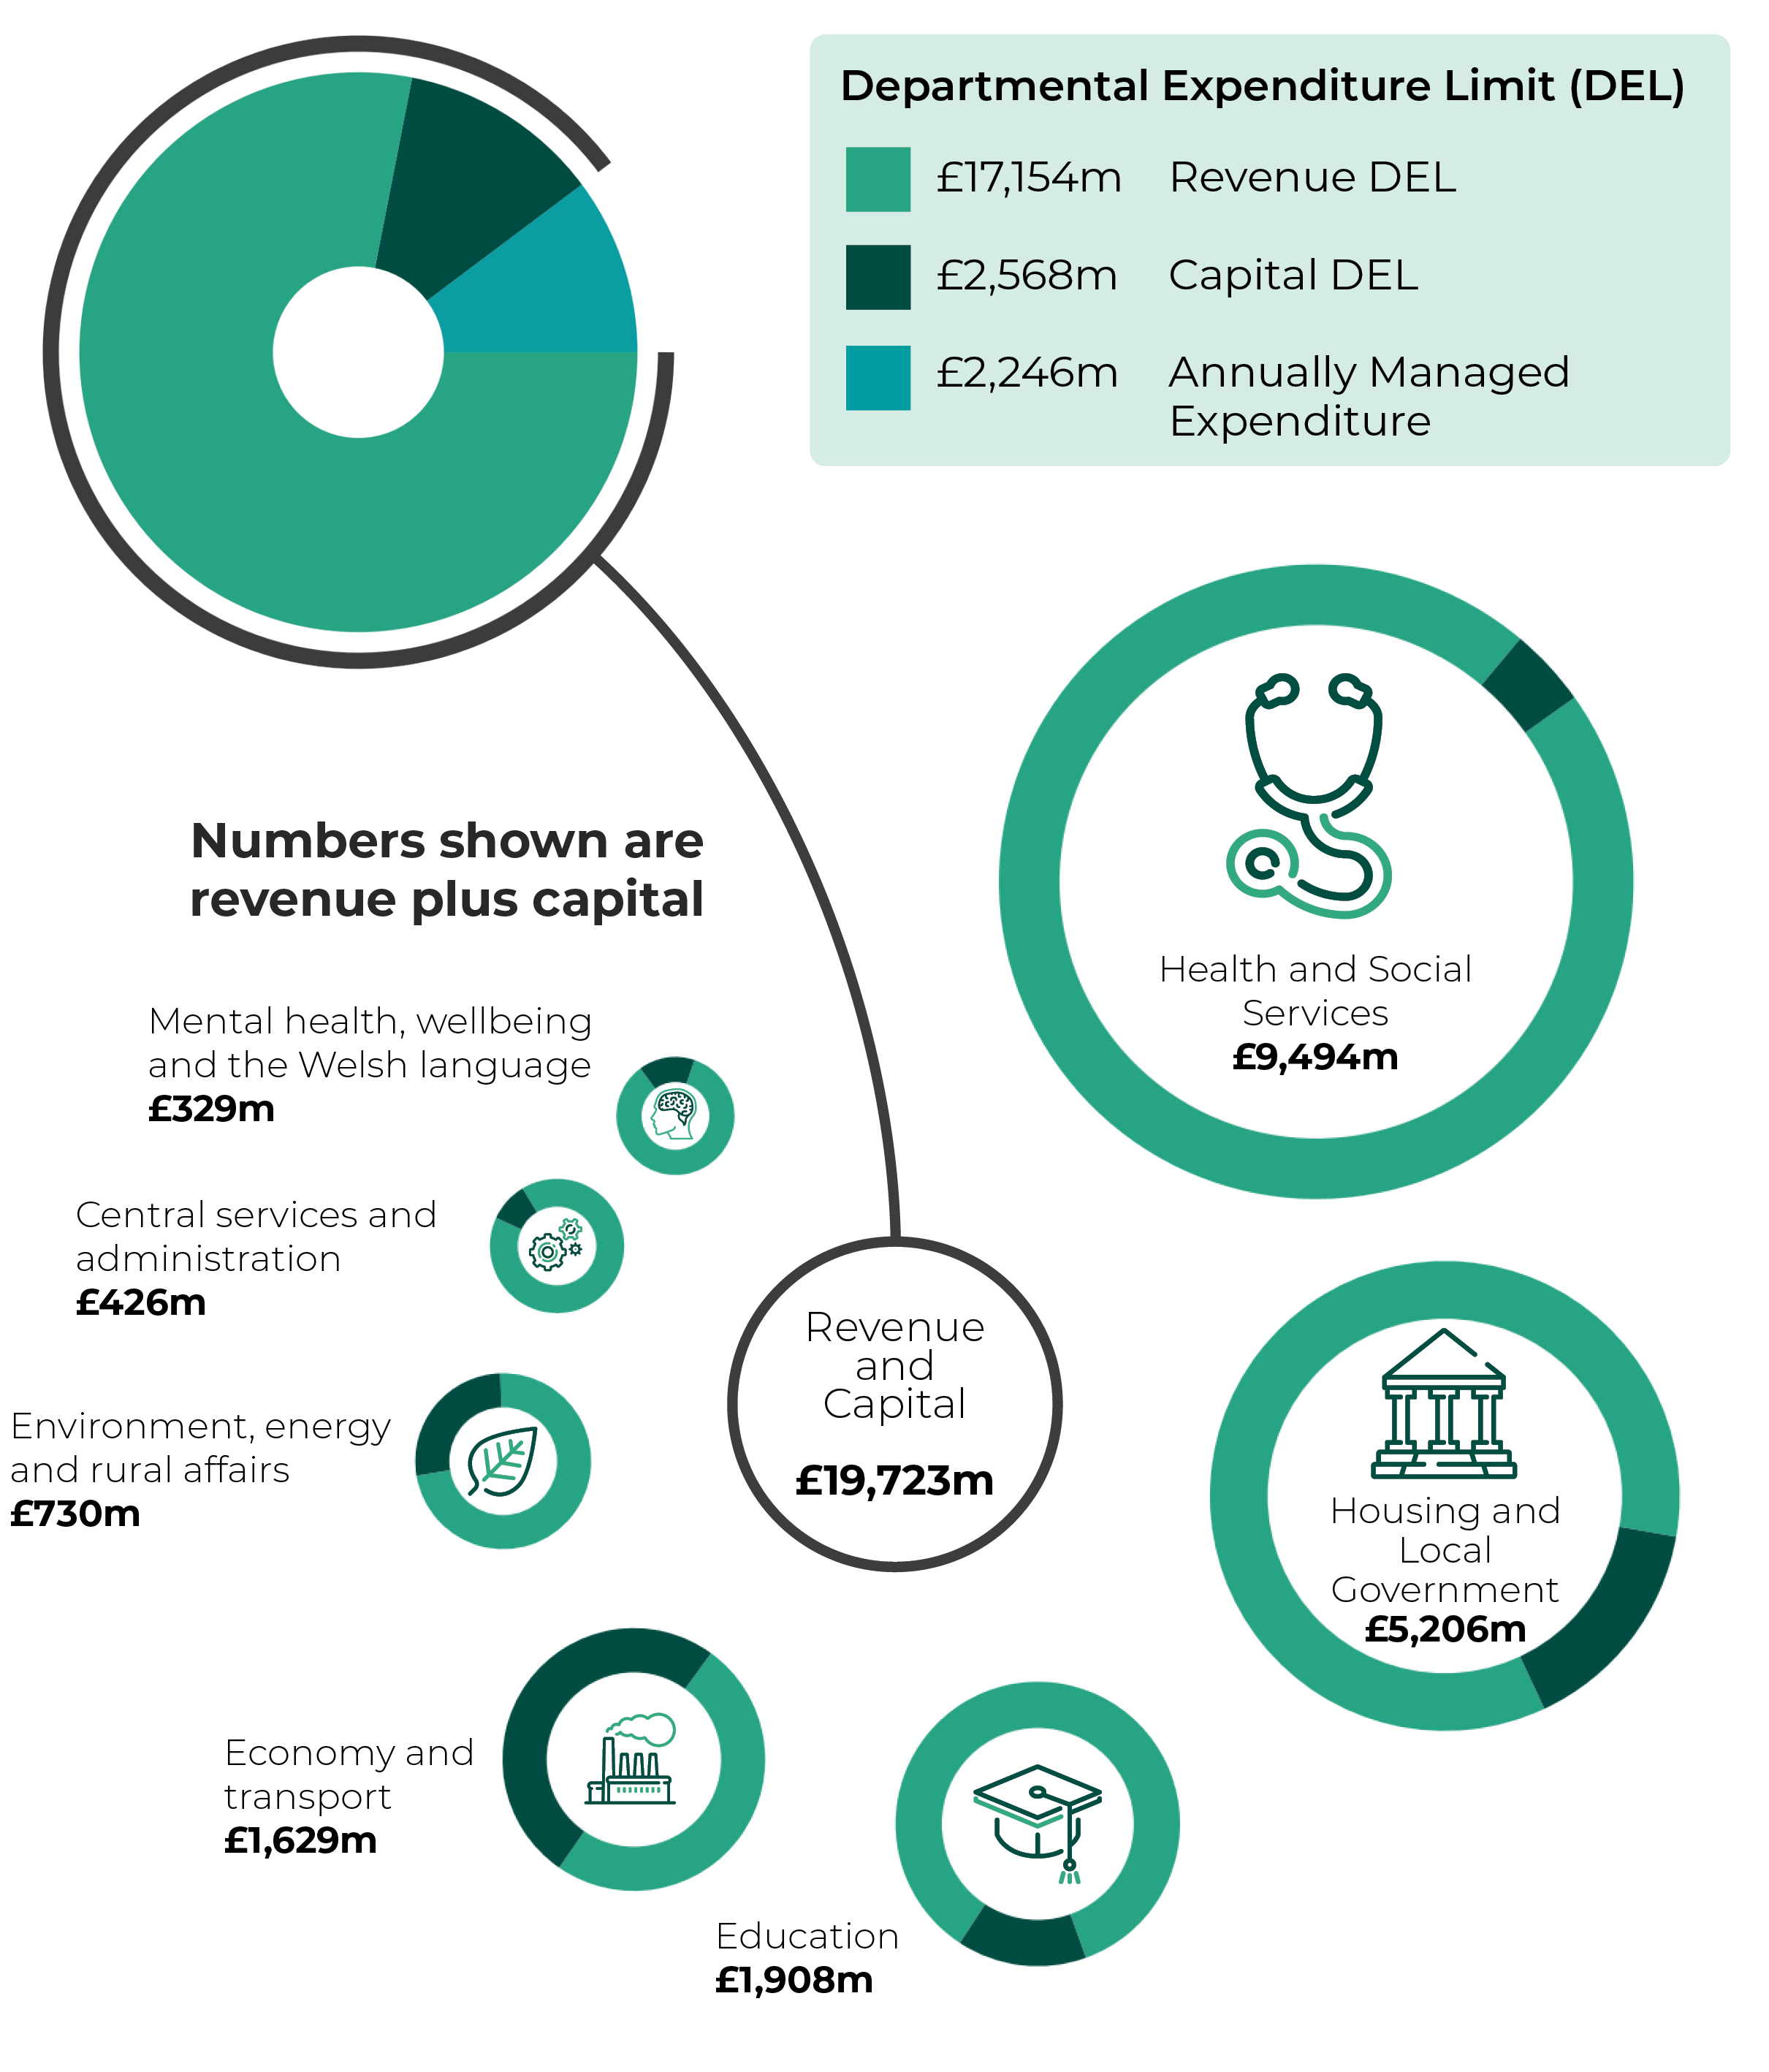 Infographic showing revenue Departmental Expenditure Limit (DEL) £17,154m, Capital DEL £2,568m and Annually Managed Expenditure £2,246m. Total DEL is £19,723m. The total DEL allocations to portfolios are Health and Social Services £9,494m, Housing and Local Government £5,206m, Education £1,908m, Economy and transport £1,629m, Environment, energy and rural affairs £730m, Central services and administration £426m, Mental Health, Wellbeing and the Welsh language £329m.